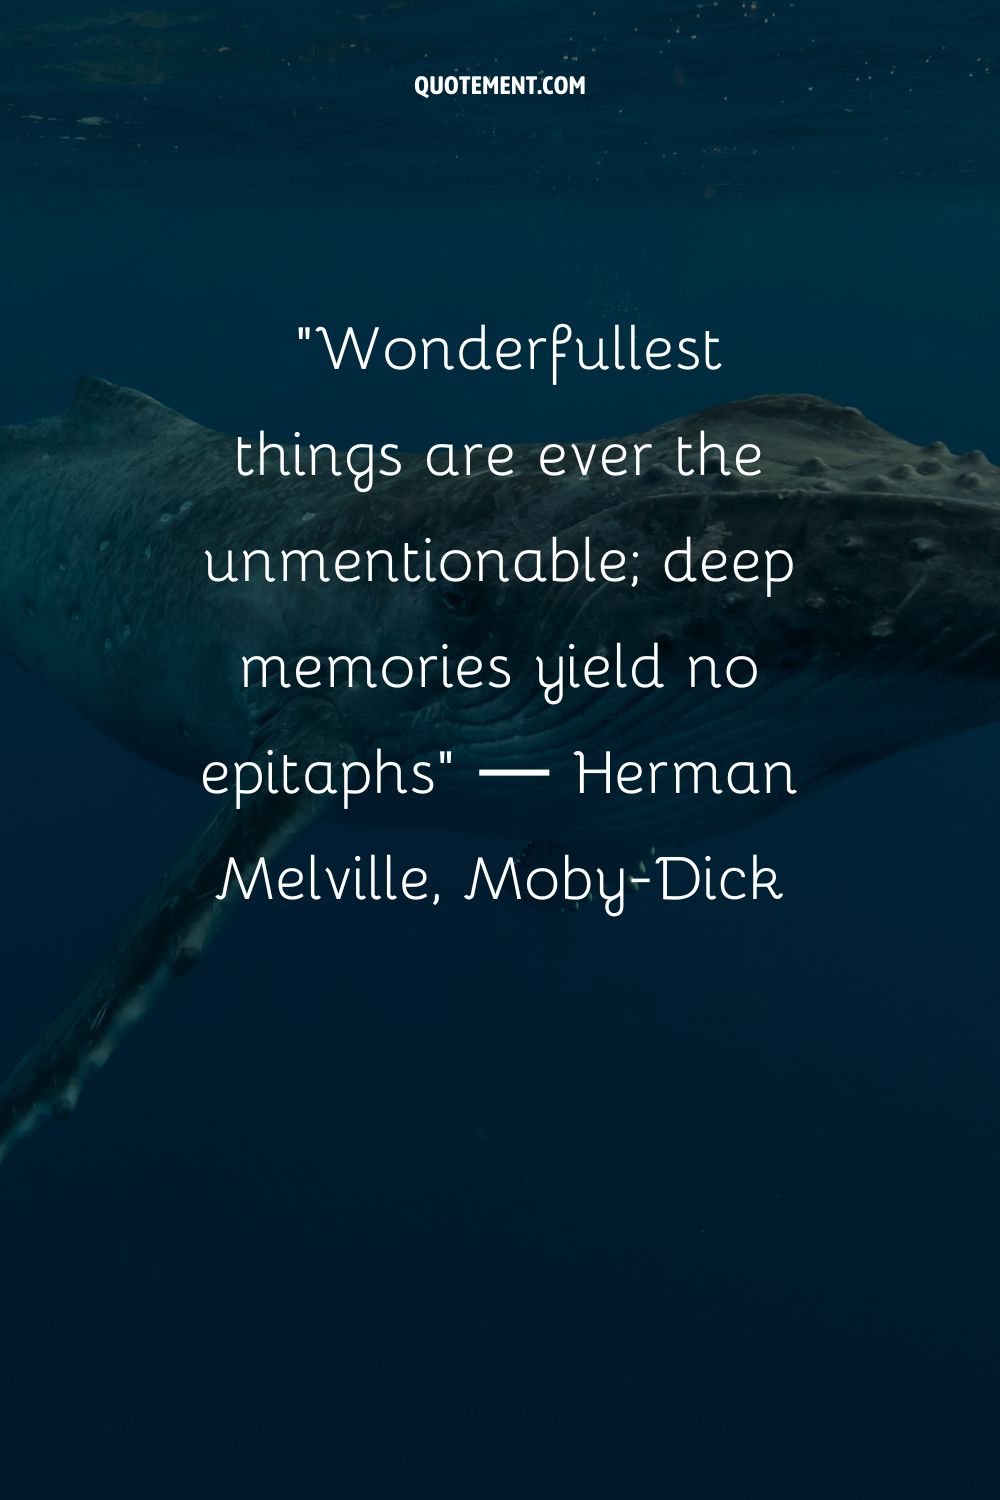 Wonderfullest things are ever the unmentionable; deep memories yield no epitaphs